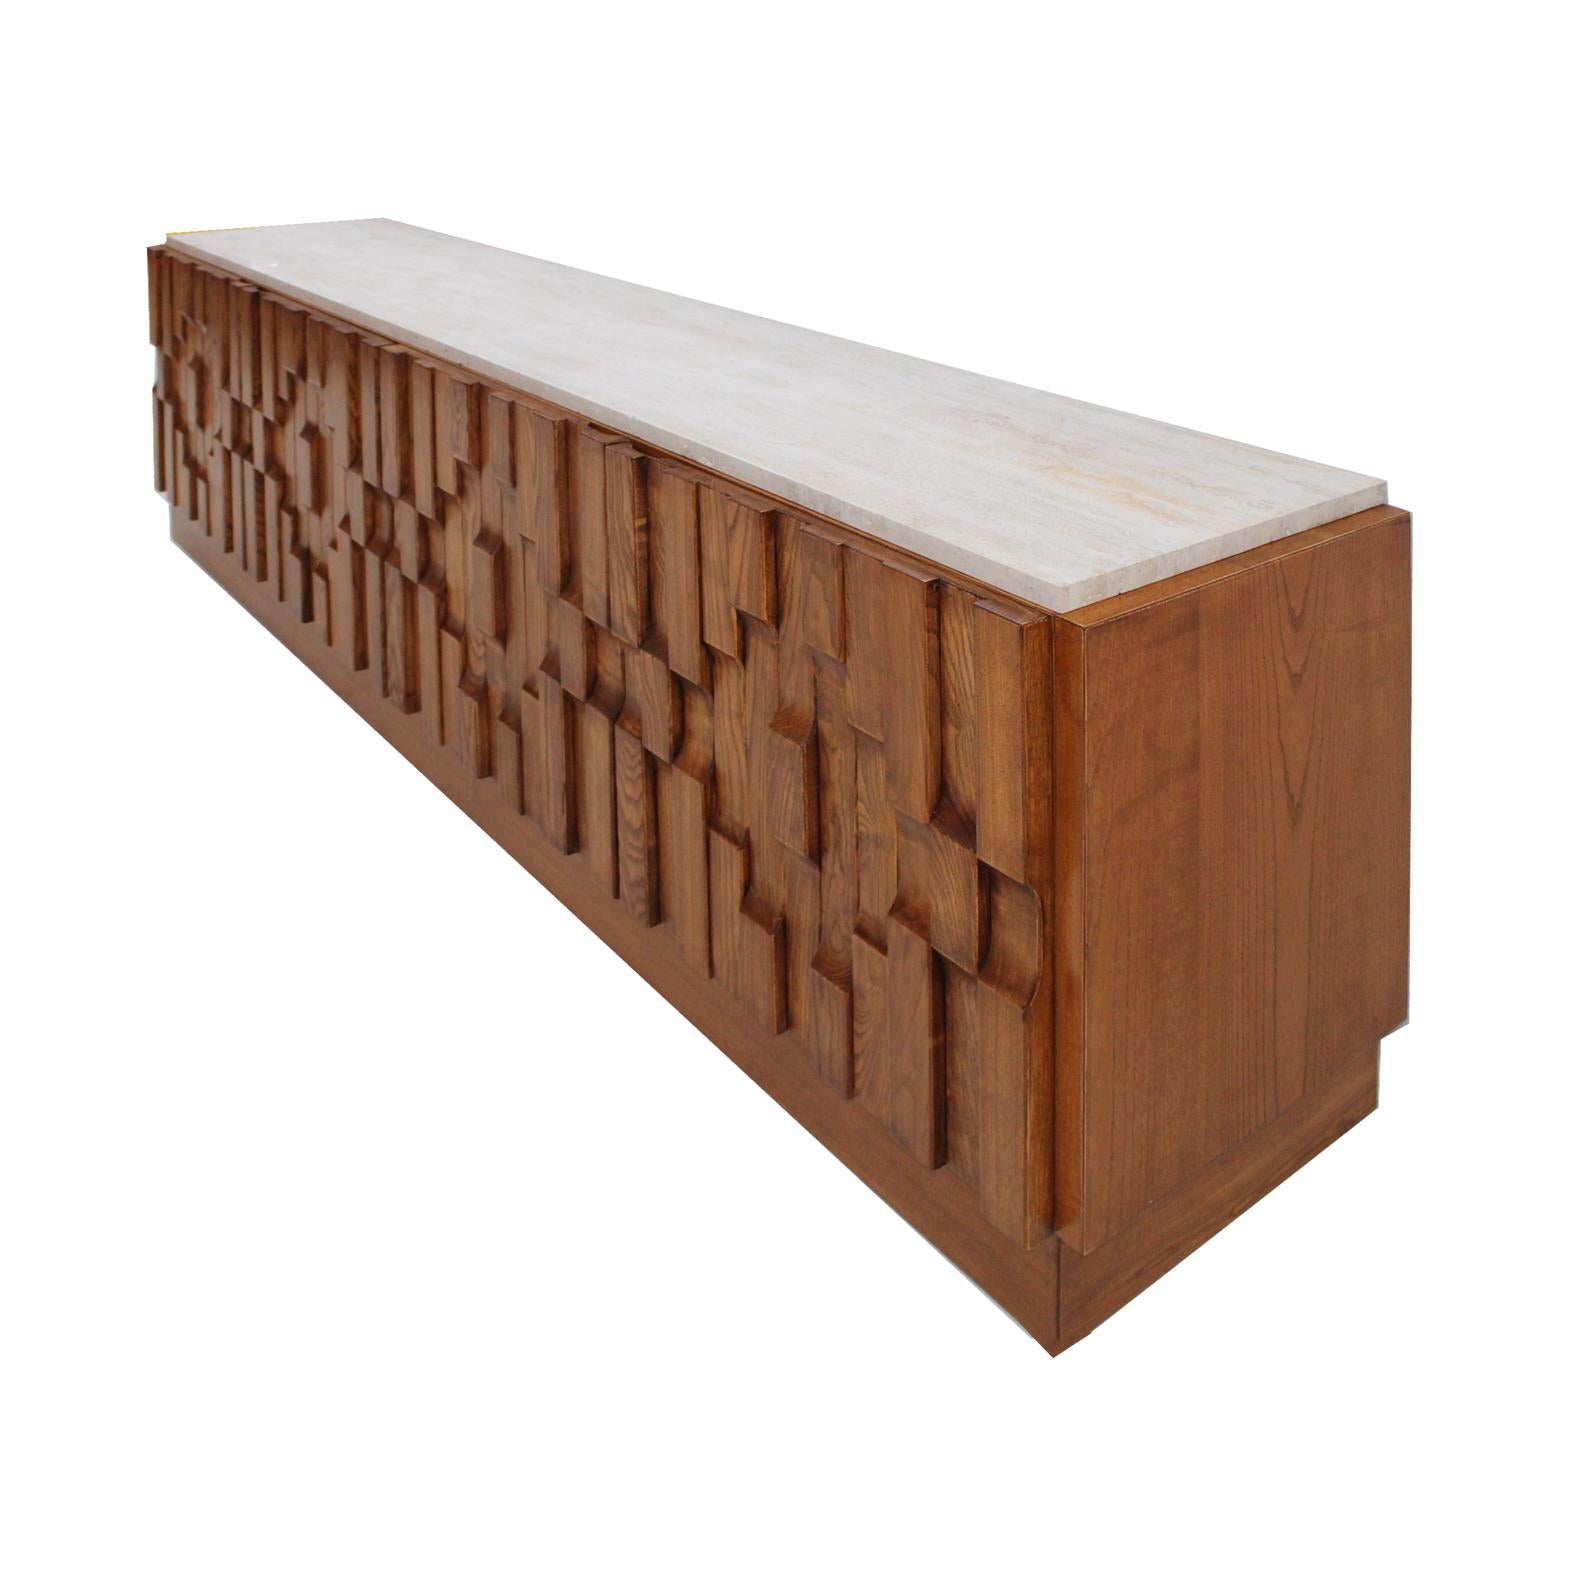 Italian Oak Wood Sideboard with Travertine Marble Top and Hand Carved Patterns For Sale 3